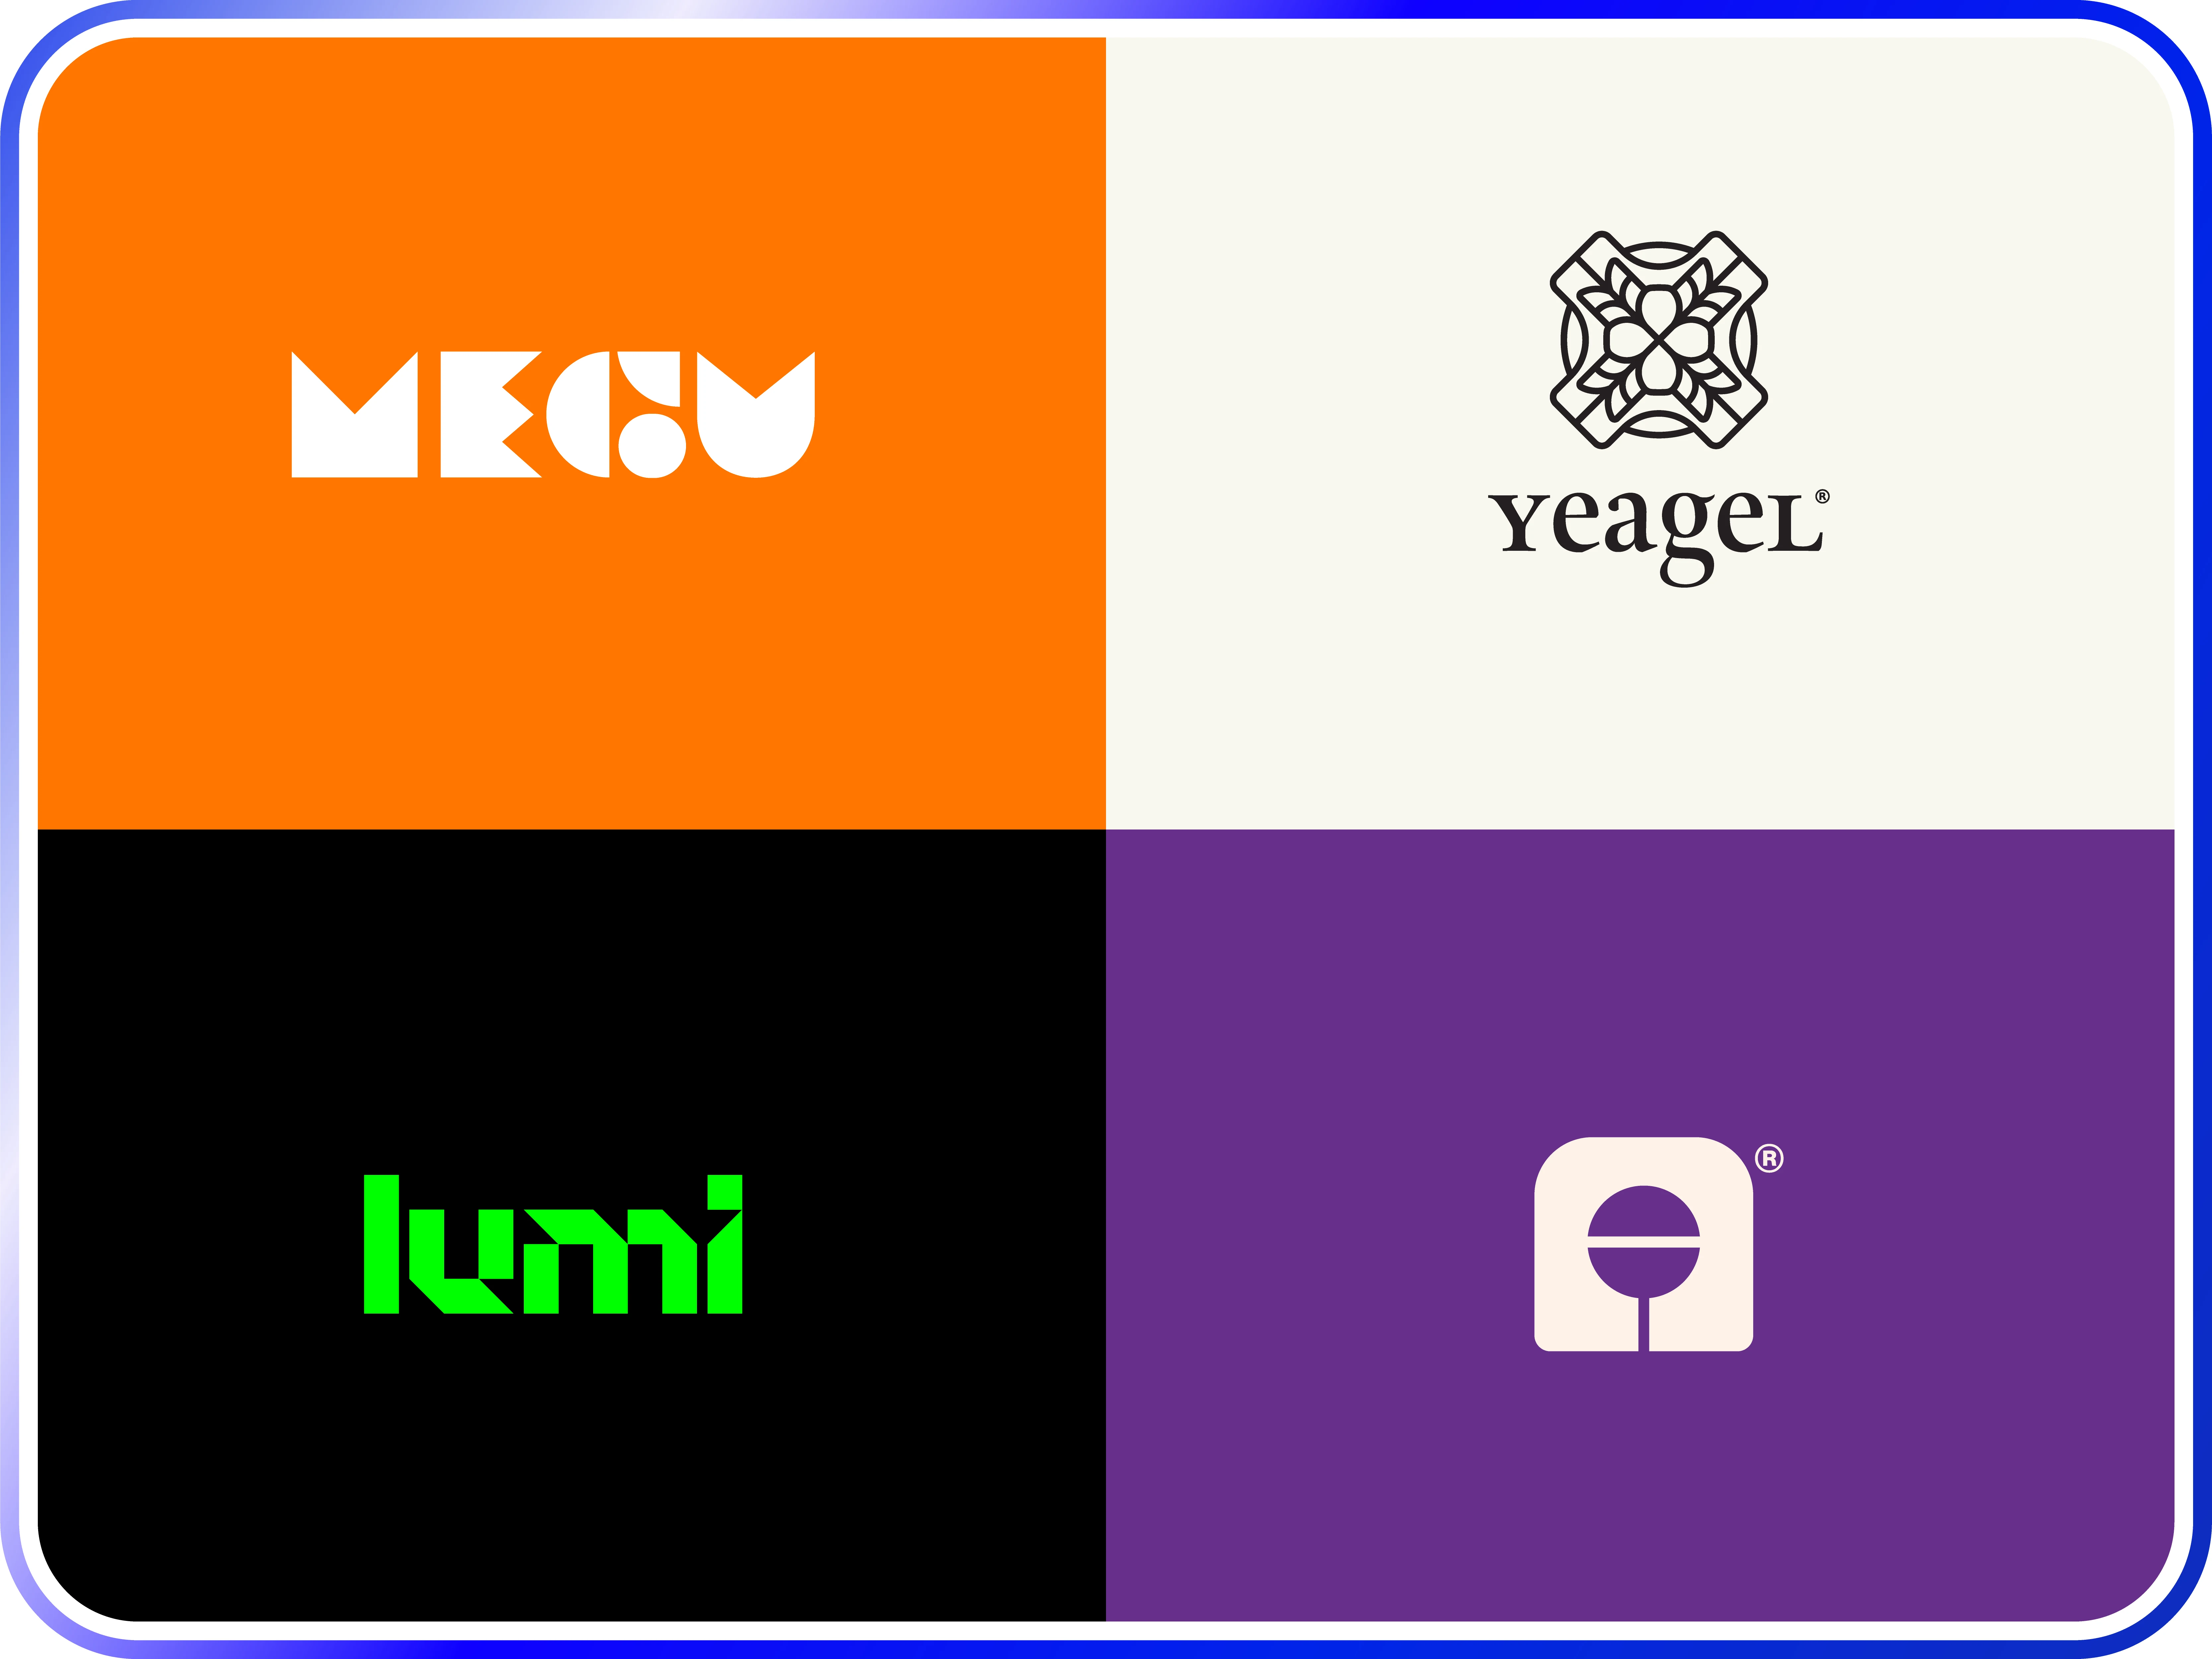 ⭐️ Impactful Logos that Define Your Brand , a service by Artyom Aghinyan